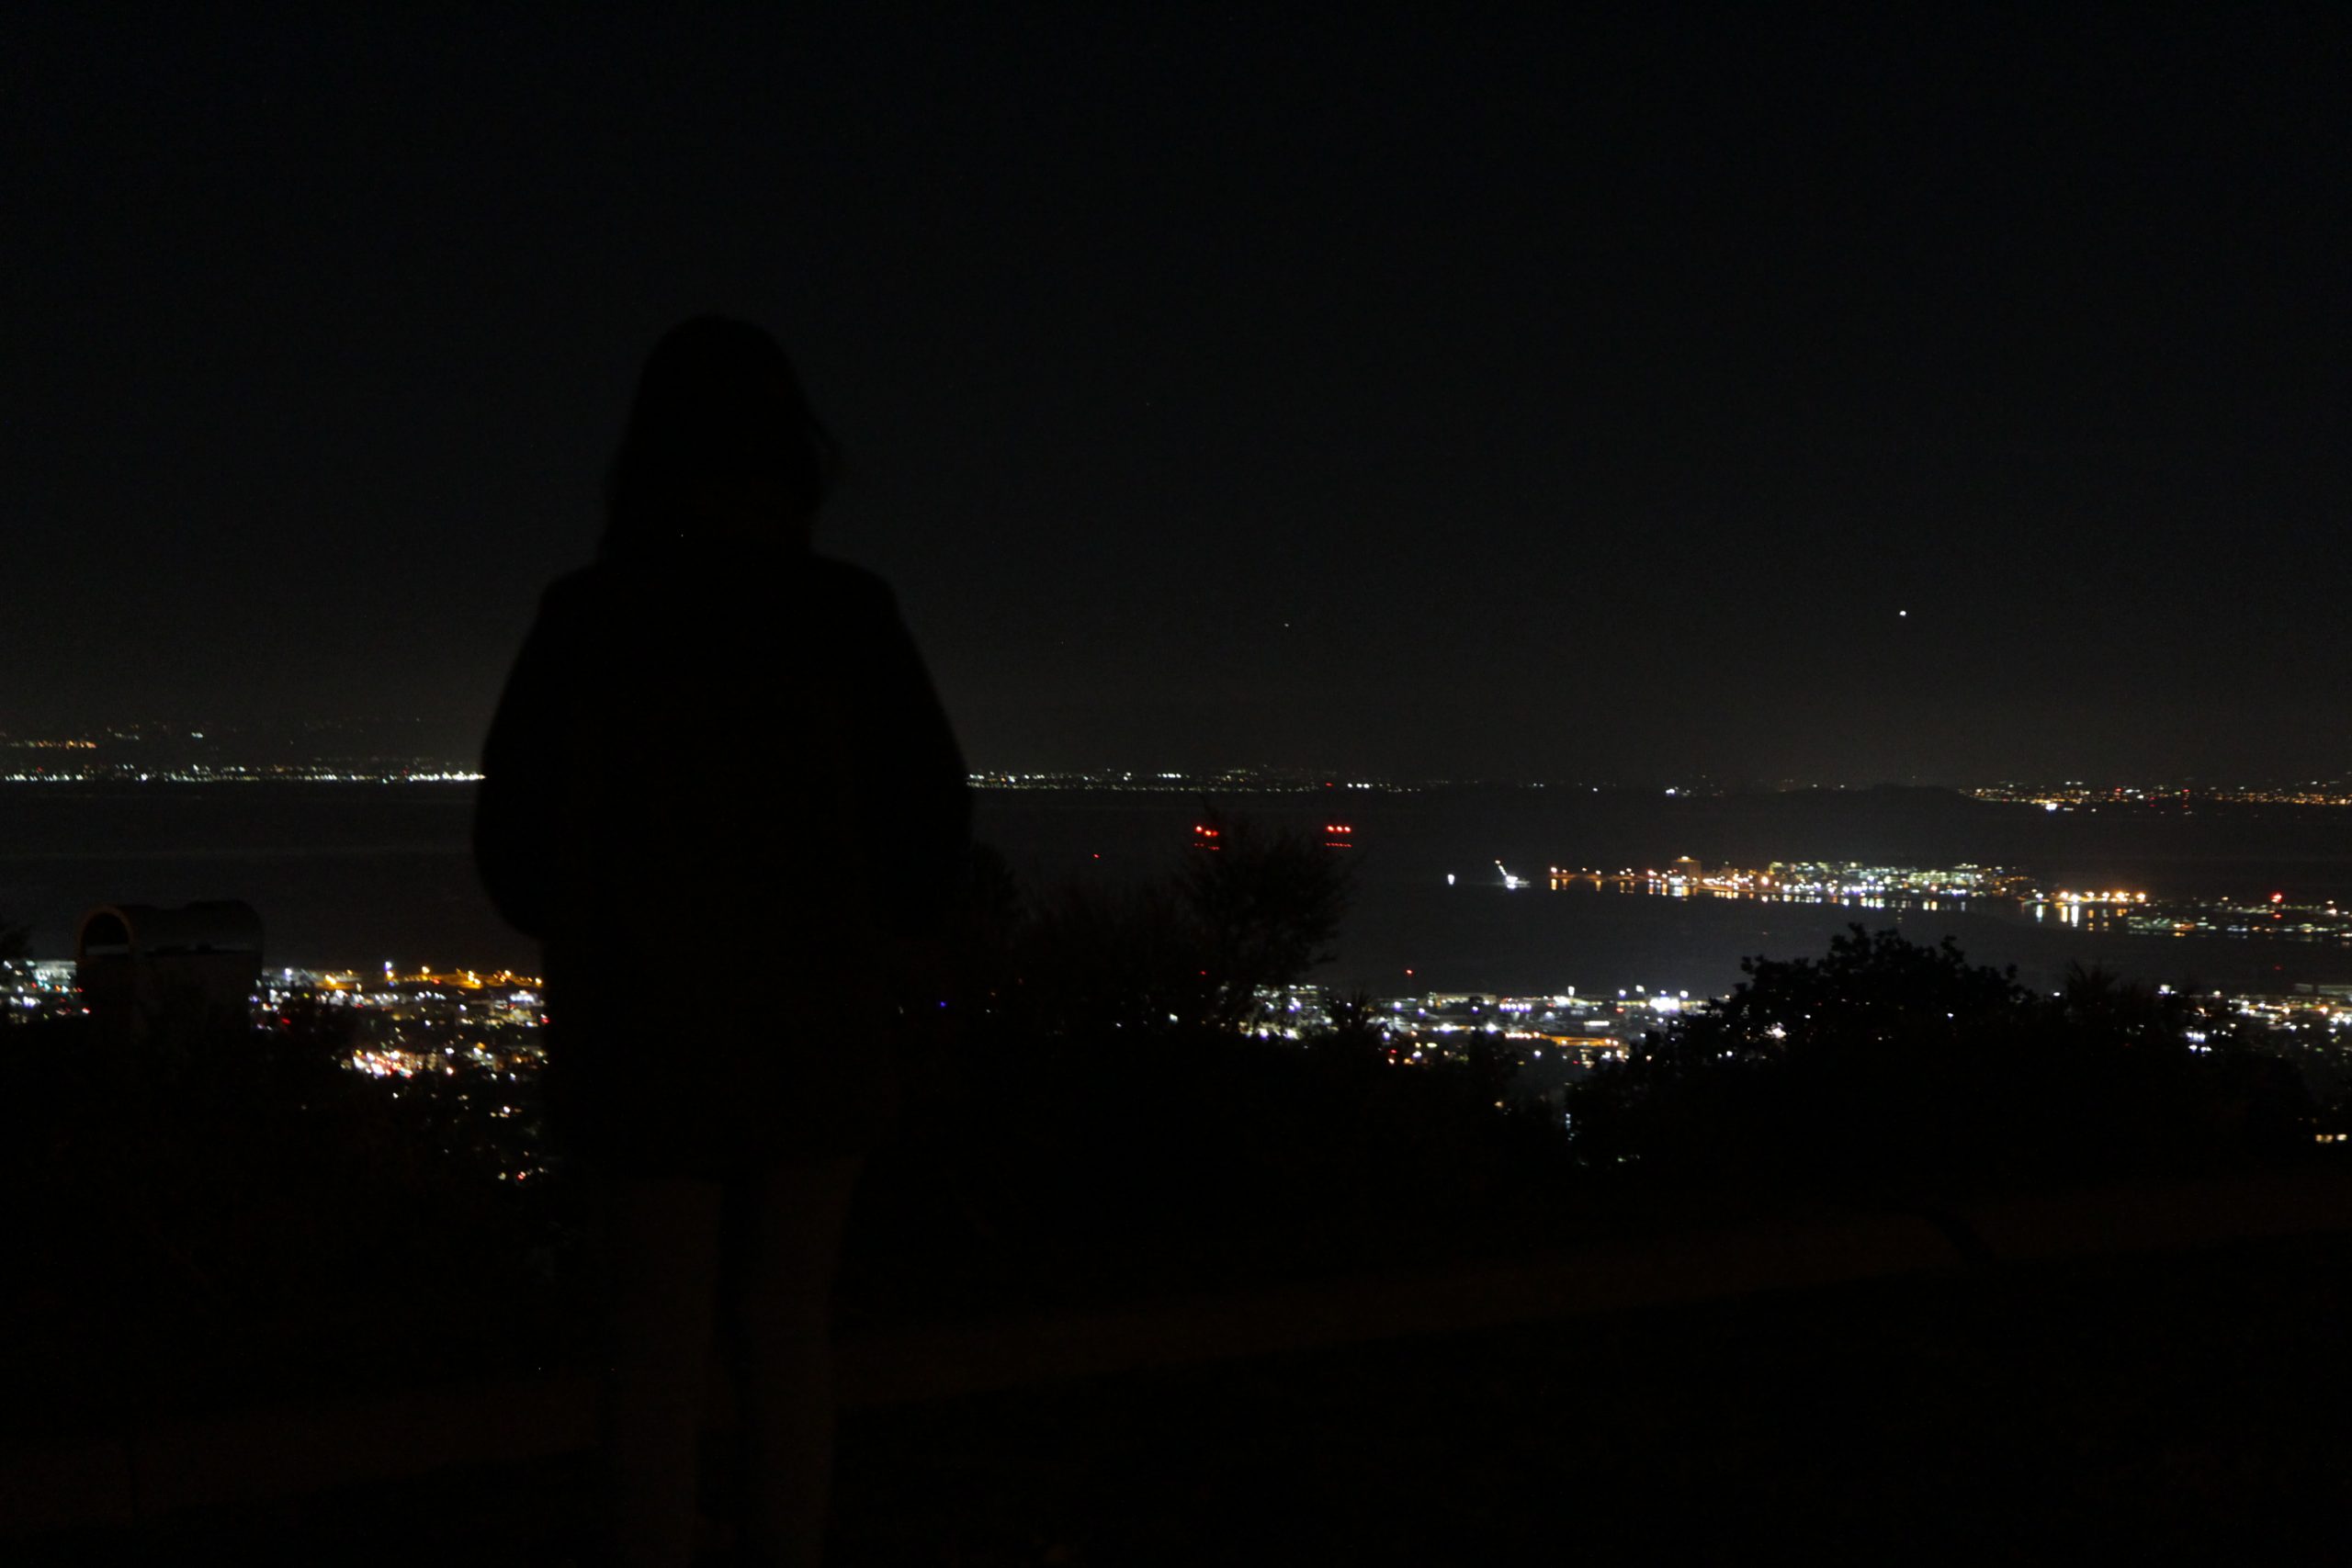 Photo of a shadowed figure standing in front of a city skyline at night.